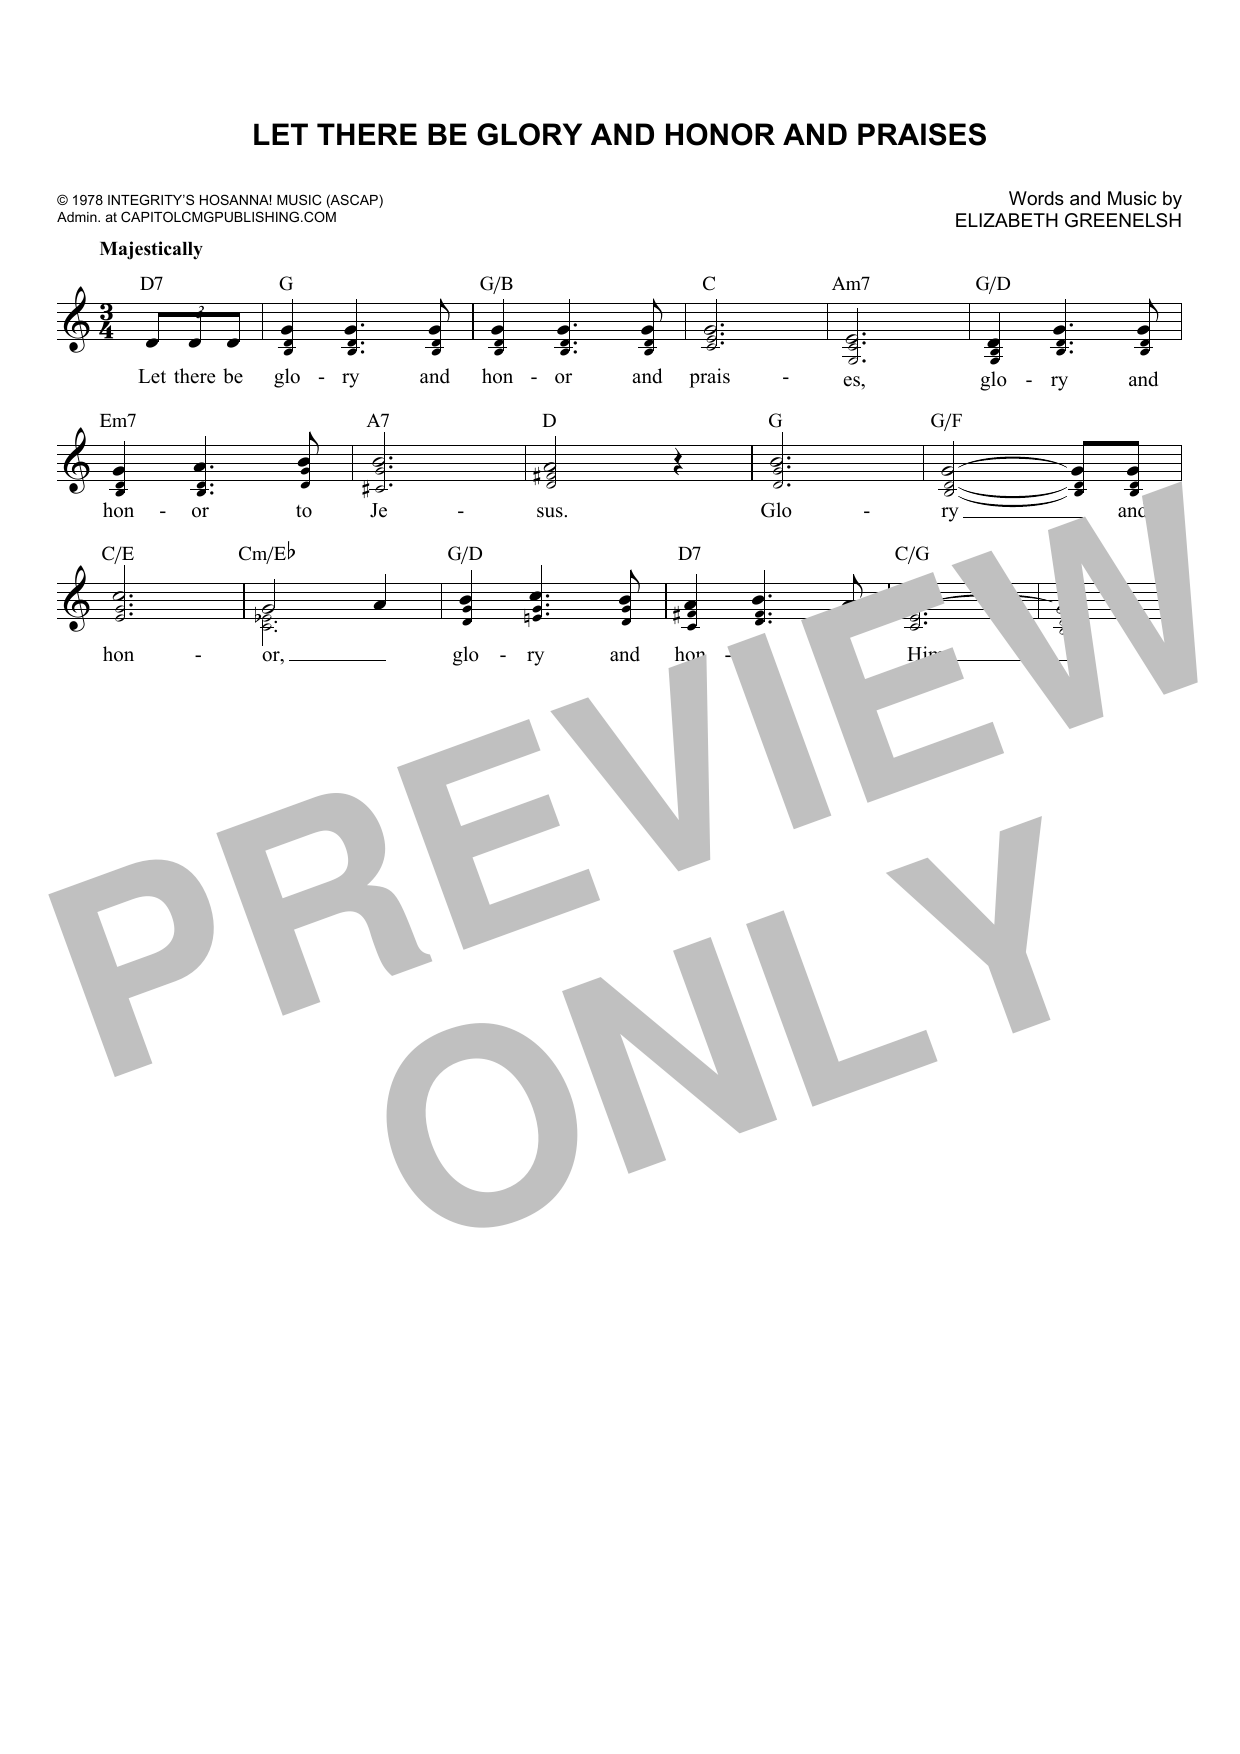 Download Elizabeth Greenelsh Let There Be Glory And Honor And Praise Sheet Music